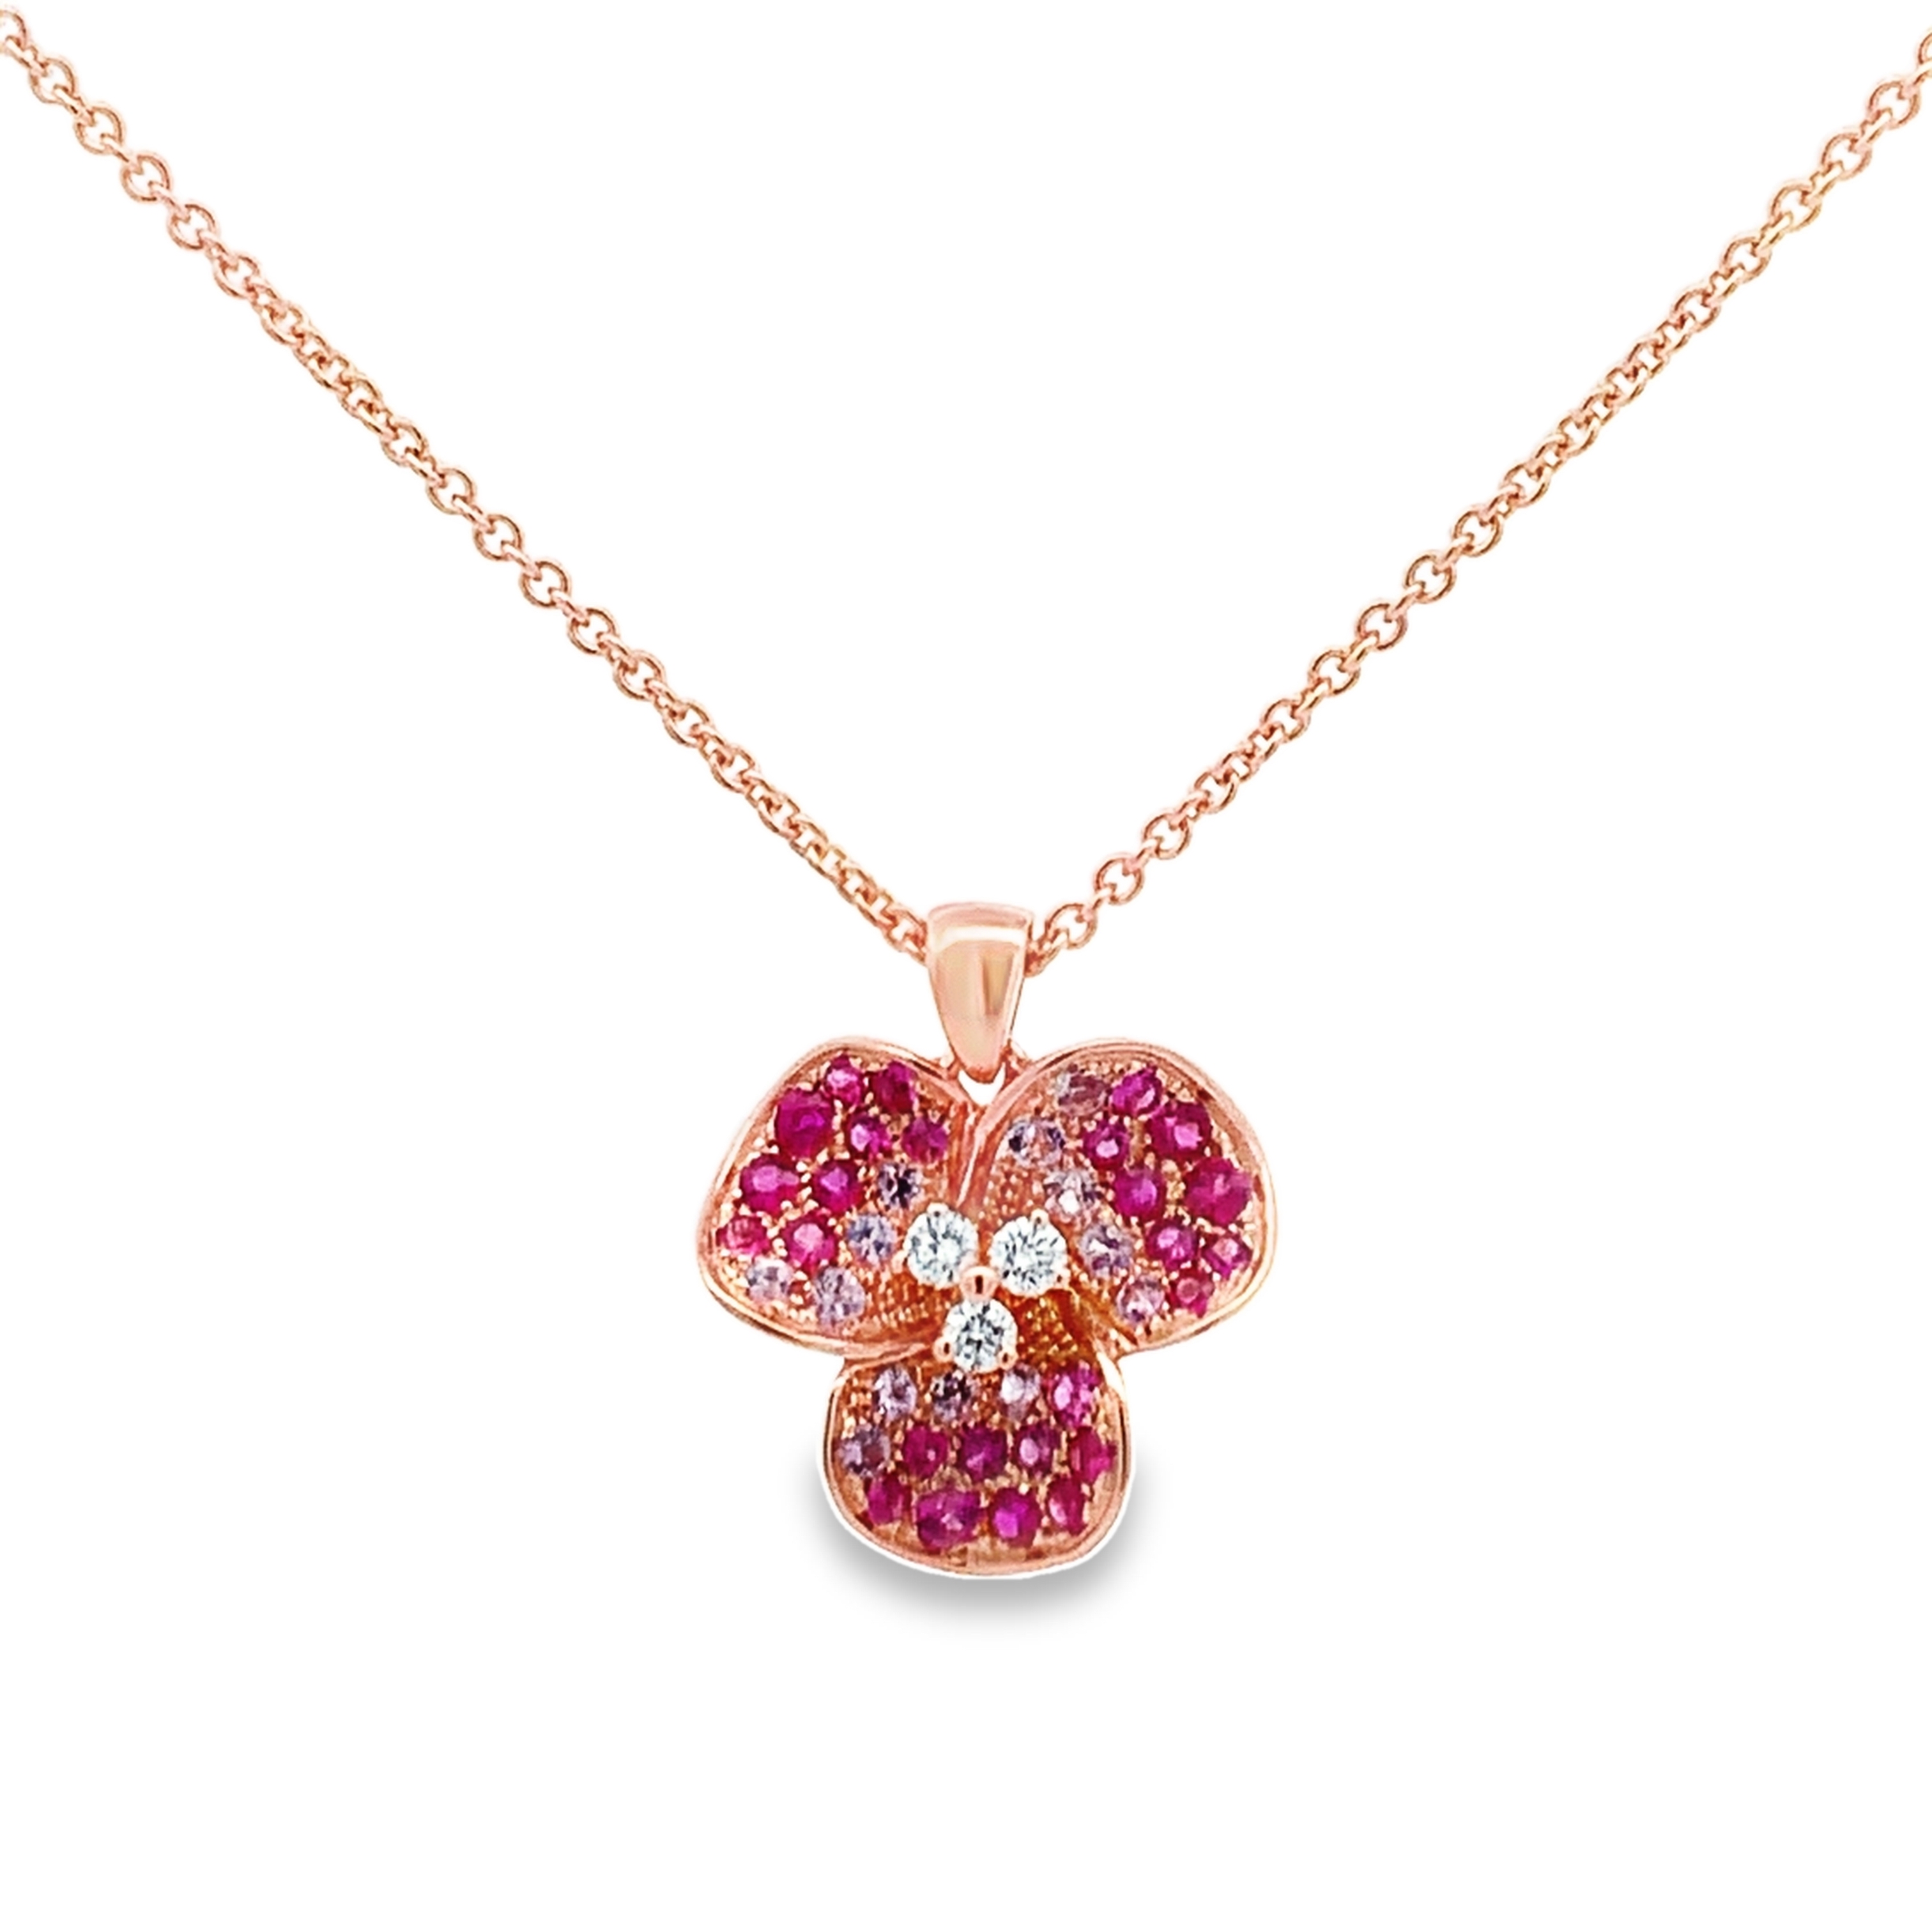 Leo Pizzo 18K Rose Gold Pink Sapphire Flower Pendant Necklace